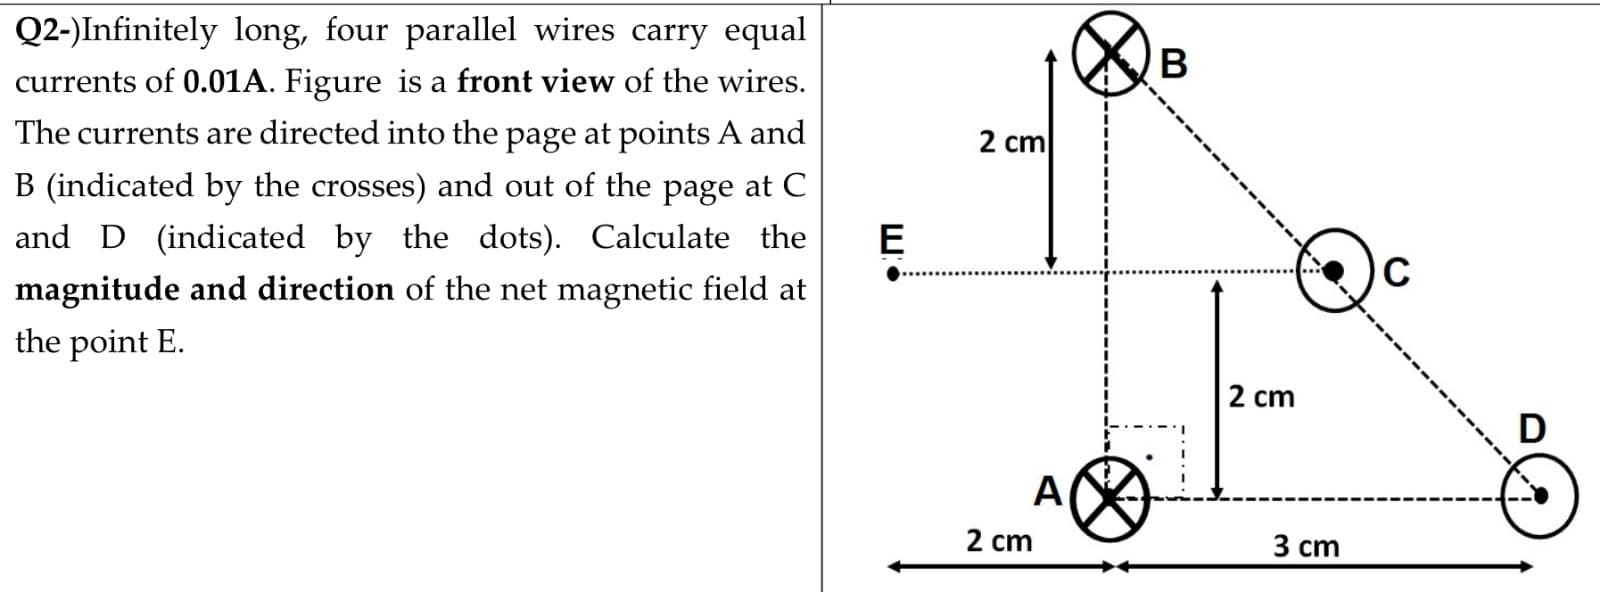 Q2-)Infinitely long, four parallel wires carry equal
В
currents of 0.01A. Figure is a front view of the wires.
The currents are directed into the page at points A and
2 cm
B (indicated by the crosses) and out of the page at C
and D (indicated by the dots). Calculate the
E
C
magnitude and direction of the net magnetic field at
the point E.
2 cm
A
2 cm
3 ст
